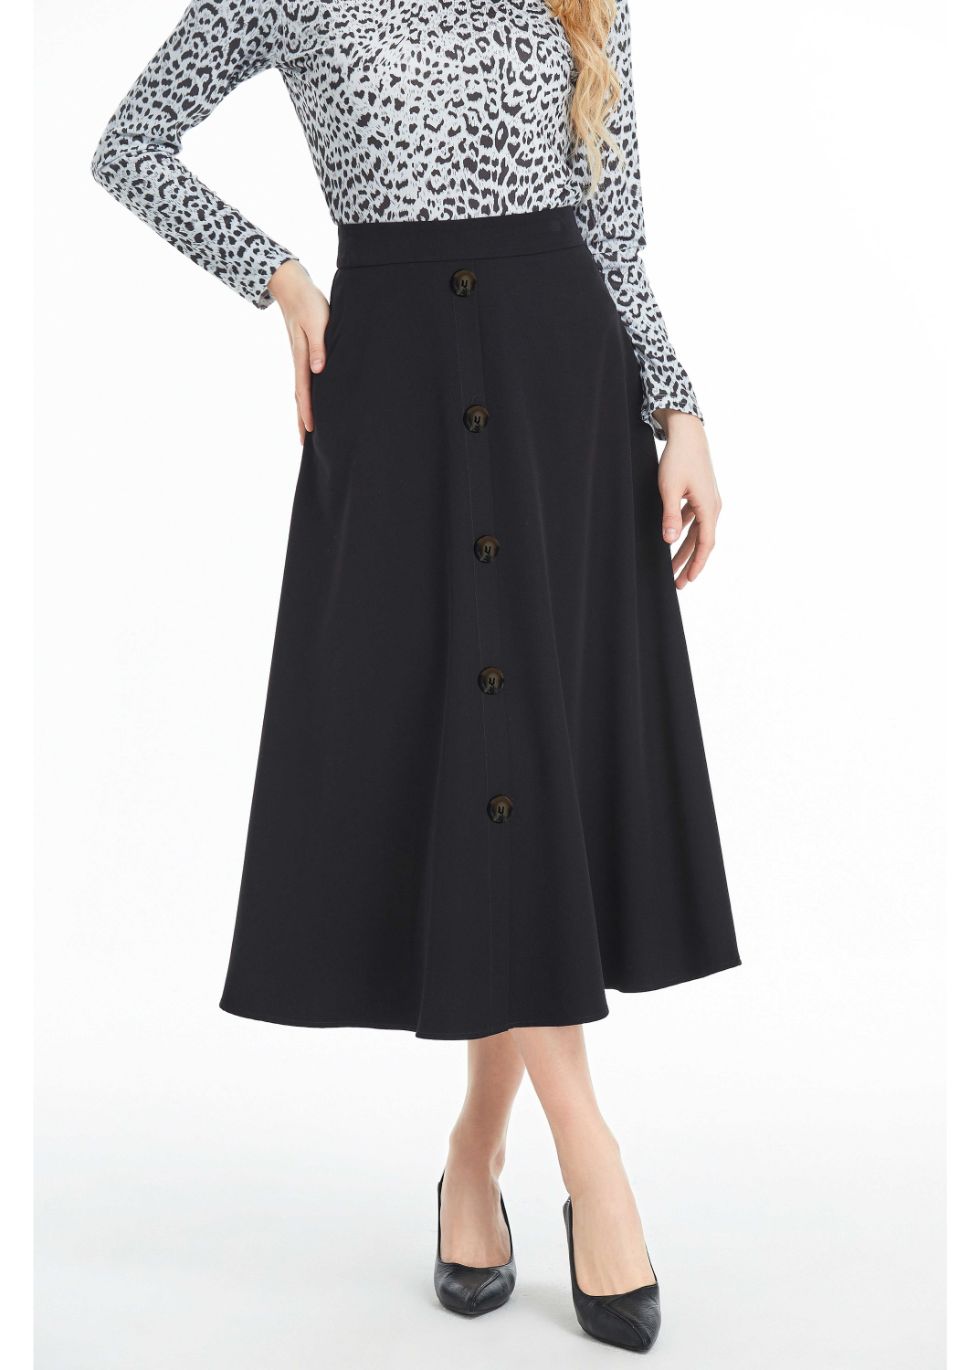 Fully Lined Black Midi Skirt with Front Button Detail - MissFinchNYC